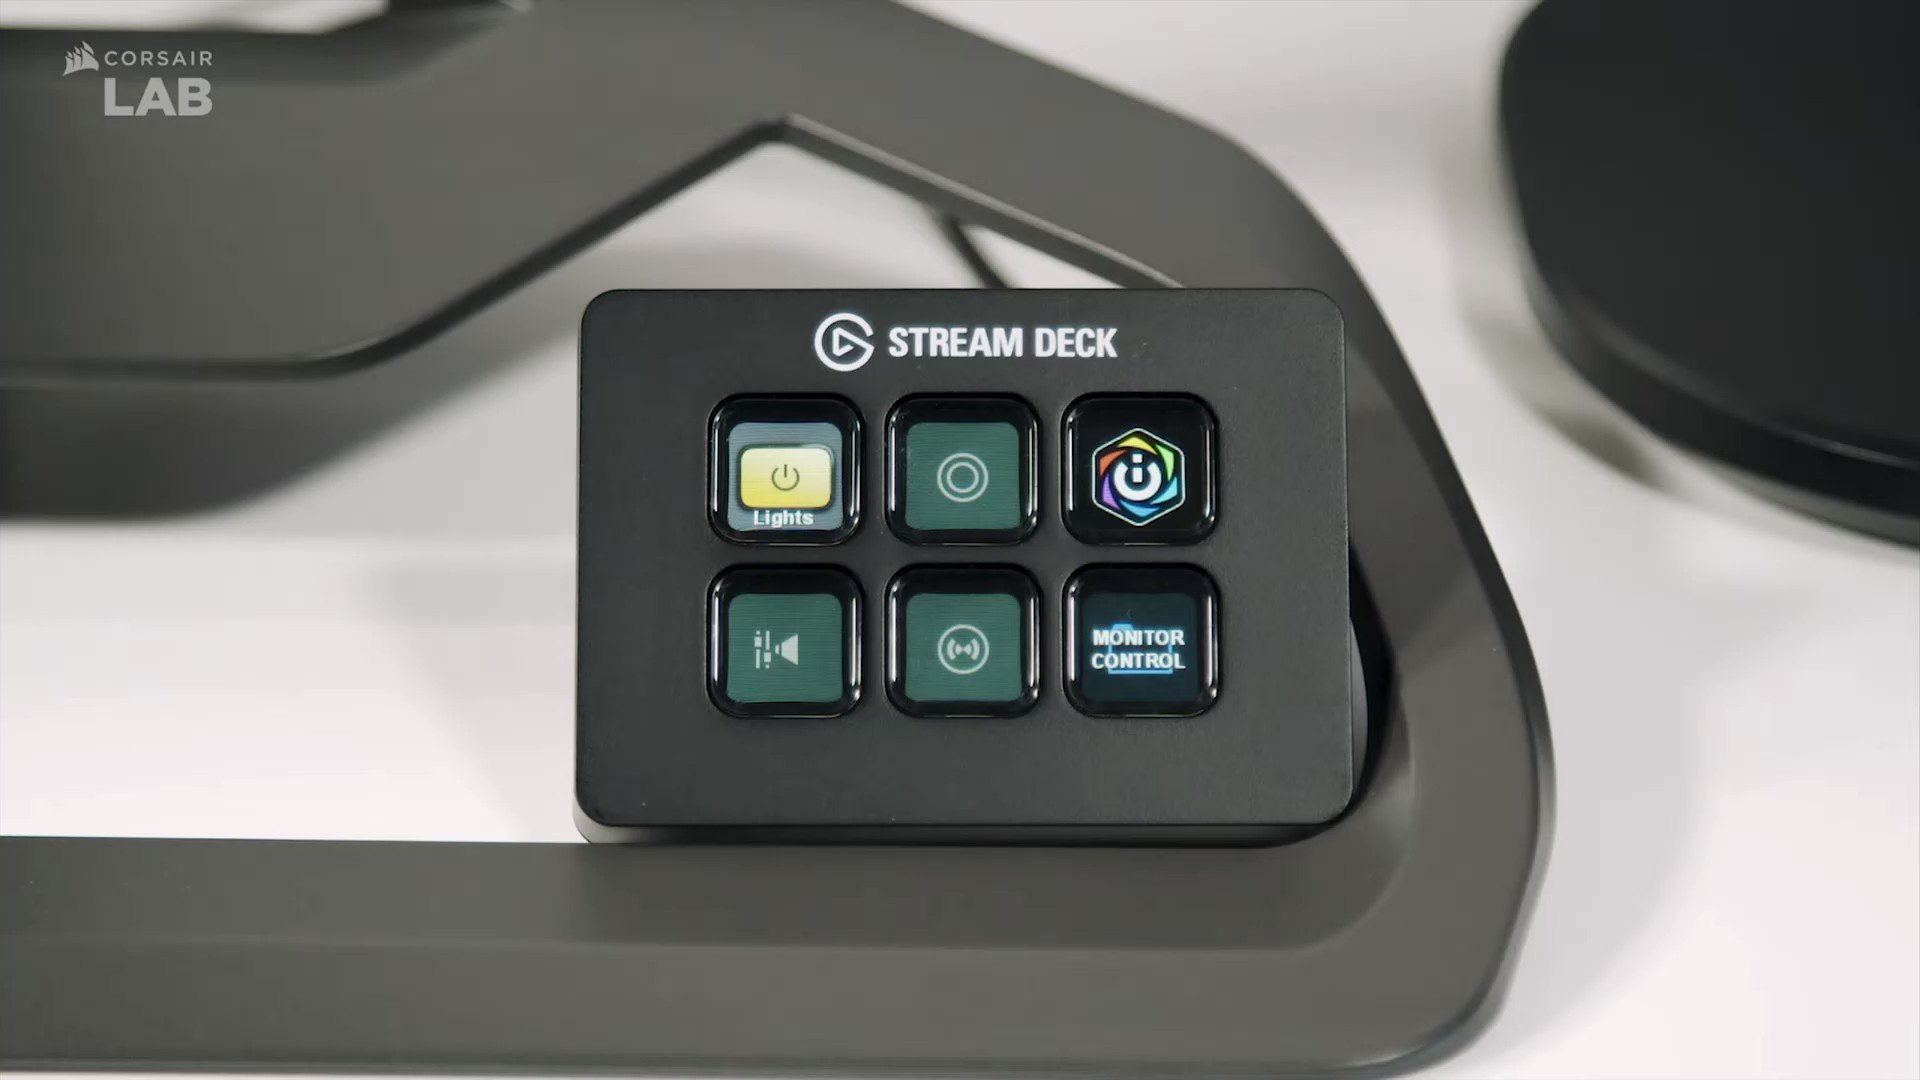 midtergang Dynamics Kommandør Elgato on Twitter: "Stream Deck has iCUE integration with @CORSAIR's new  XENEON Monitor. Control your Monitor's display settings with a single key  press. 🖼 Picture Mode 🔁 Refresh Overlay 👁 Eye Saver